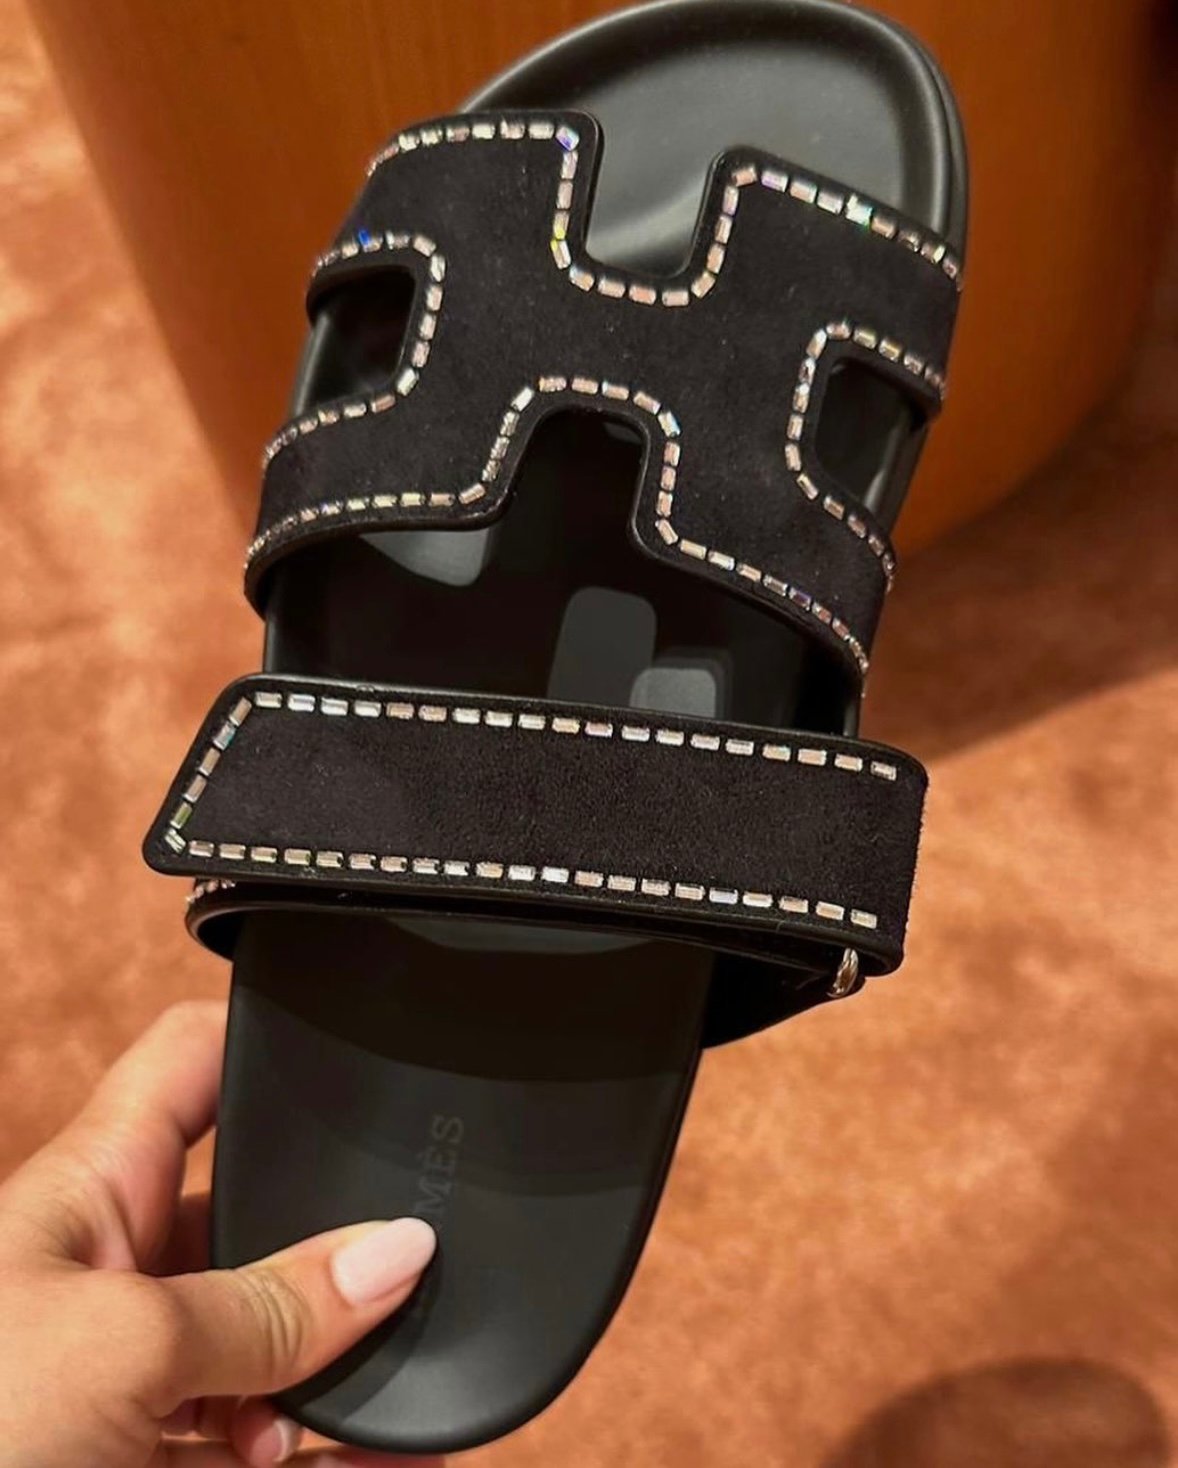 Hermes Birkenstocks: Why Are Celebrities Buying Them? - FASHION